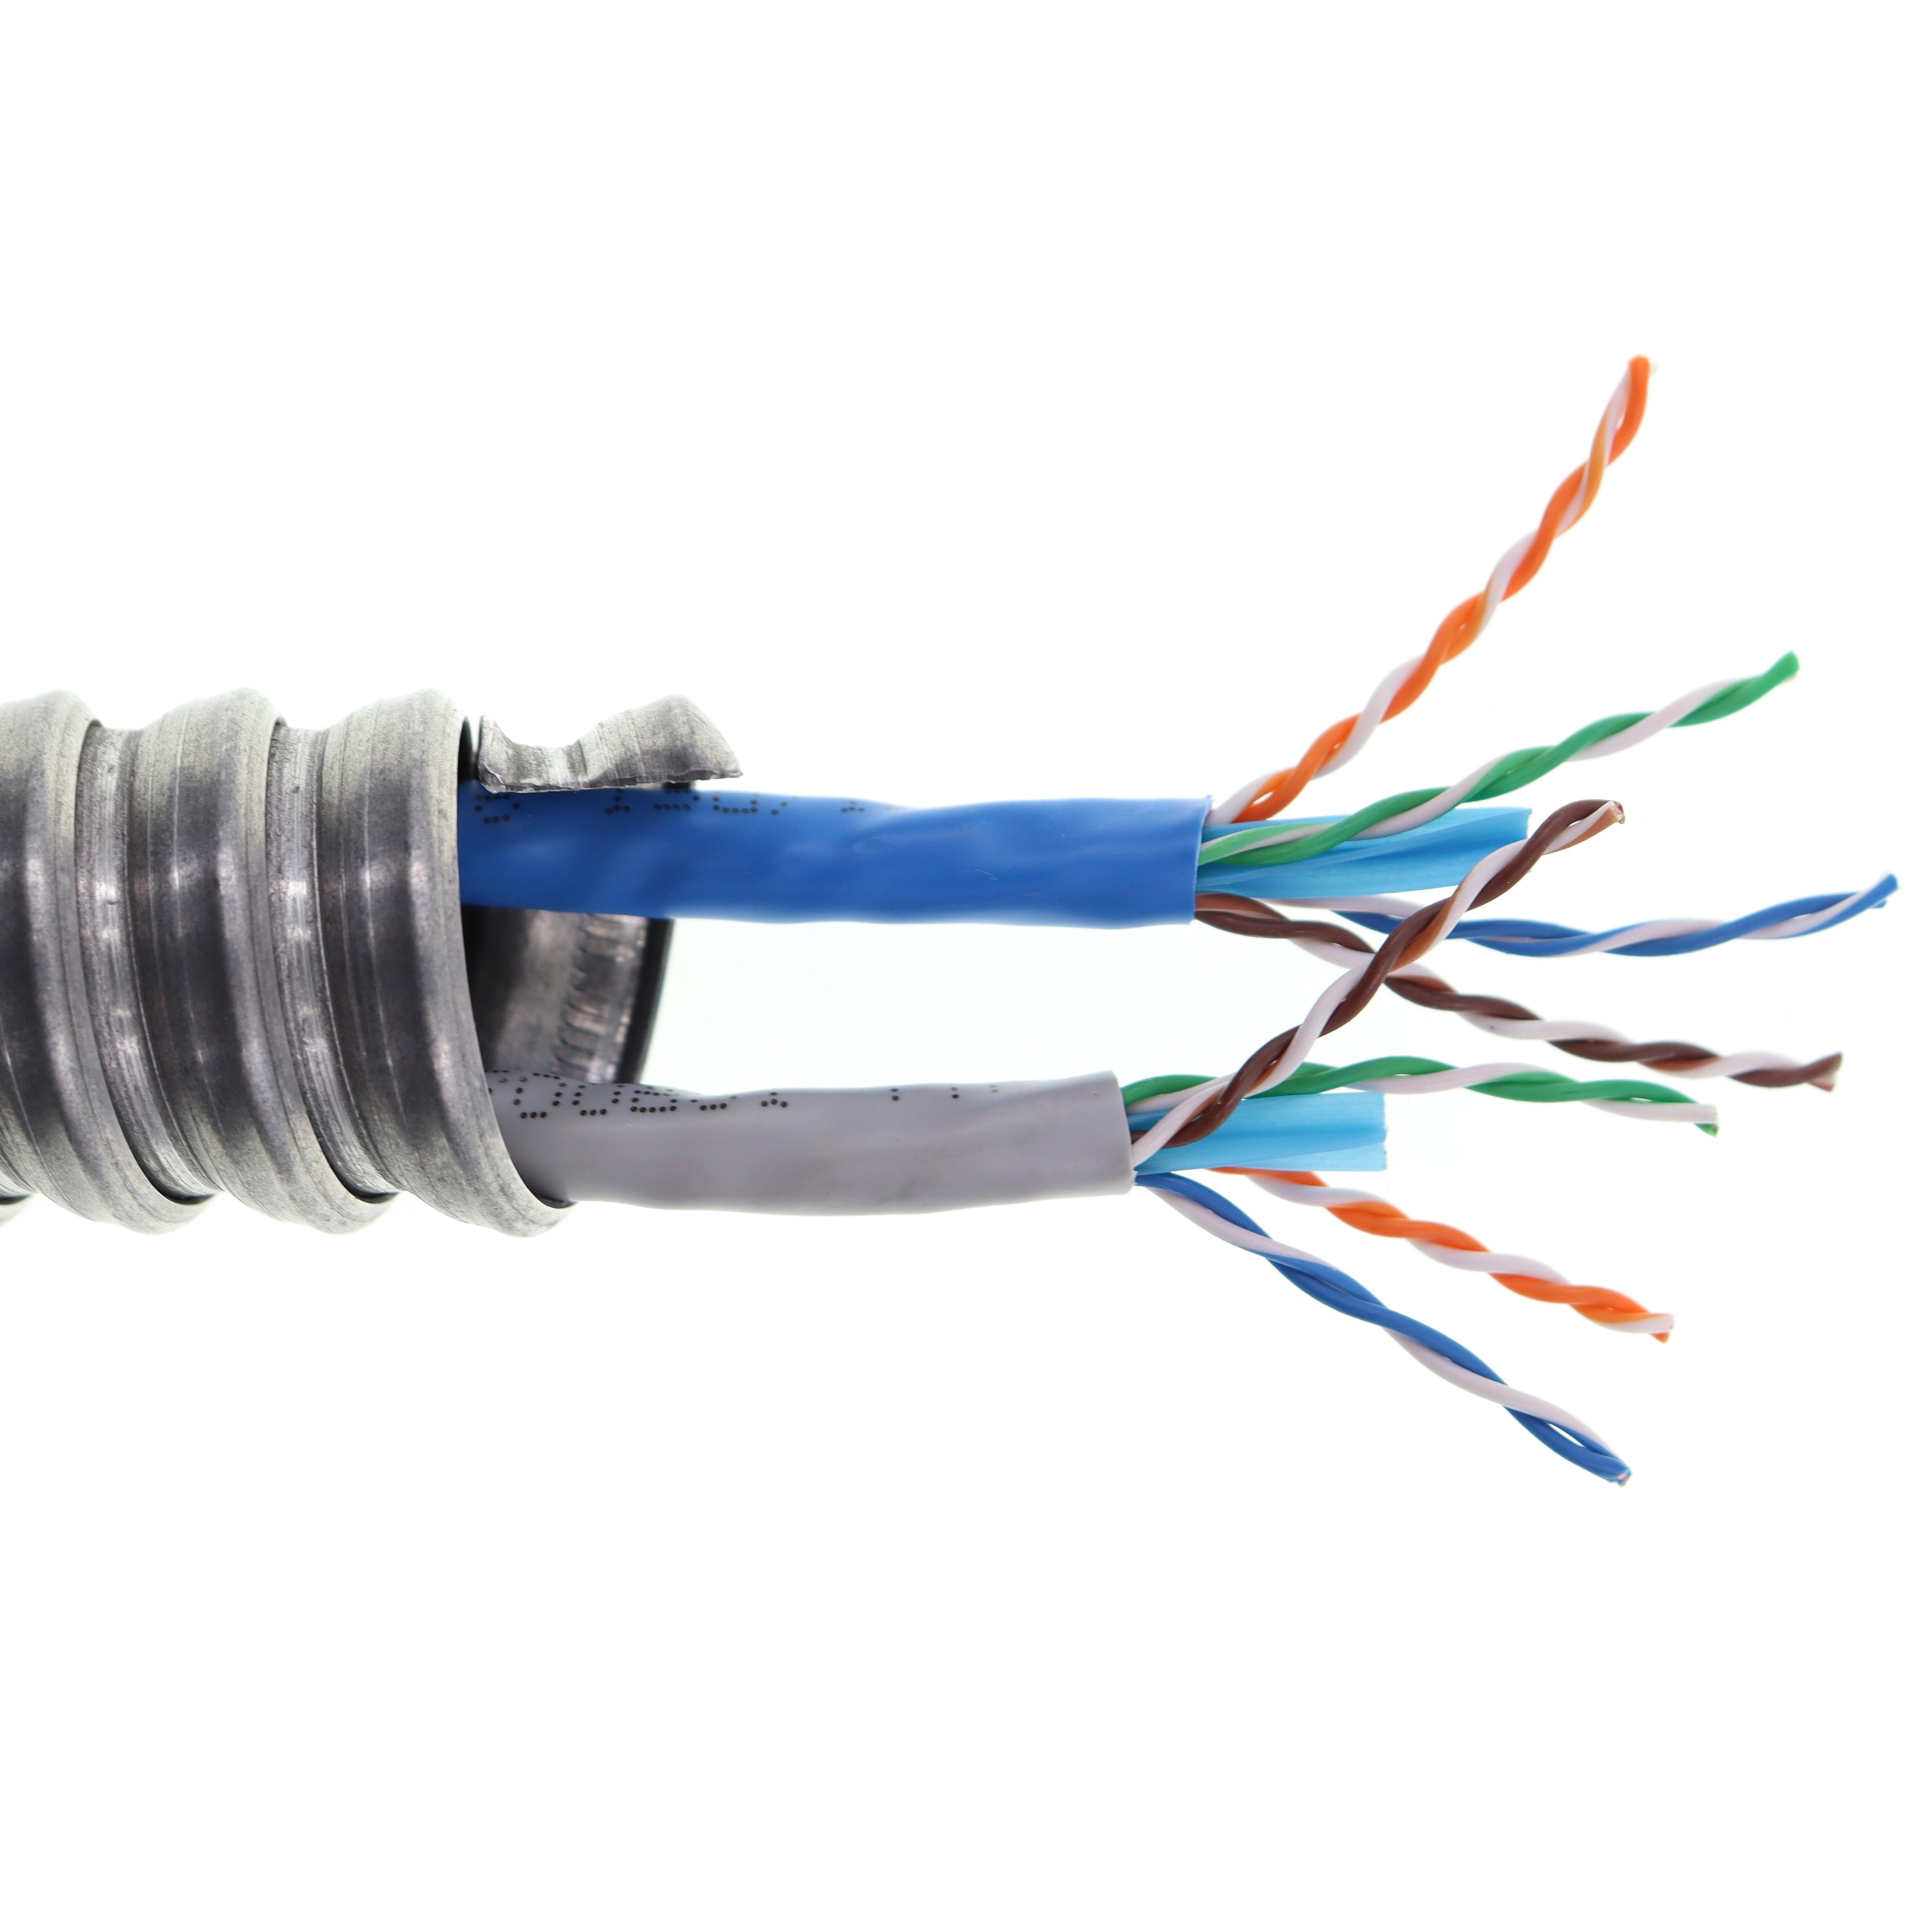 Commscope, COMMSCOPE 75N4A2 ARMORED CAT6 ETHERNET CABLE, MC CLAD, 2X CAT6, PVC, 1000-FEET